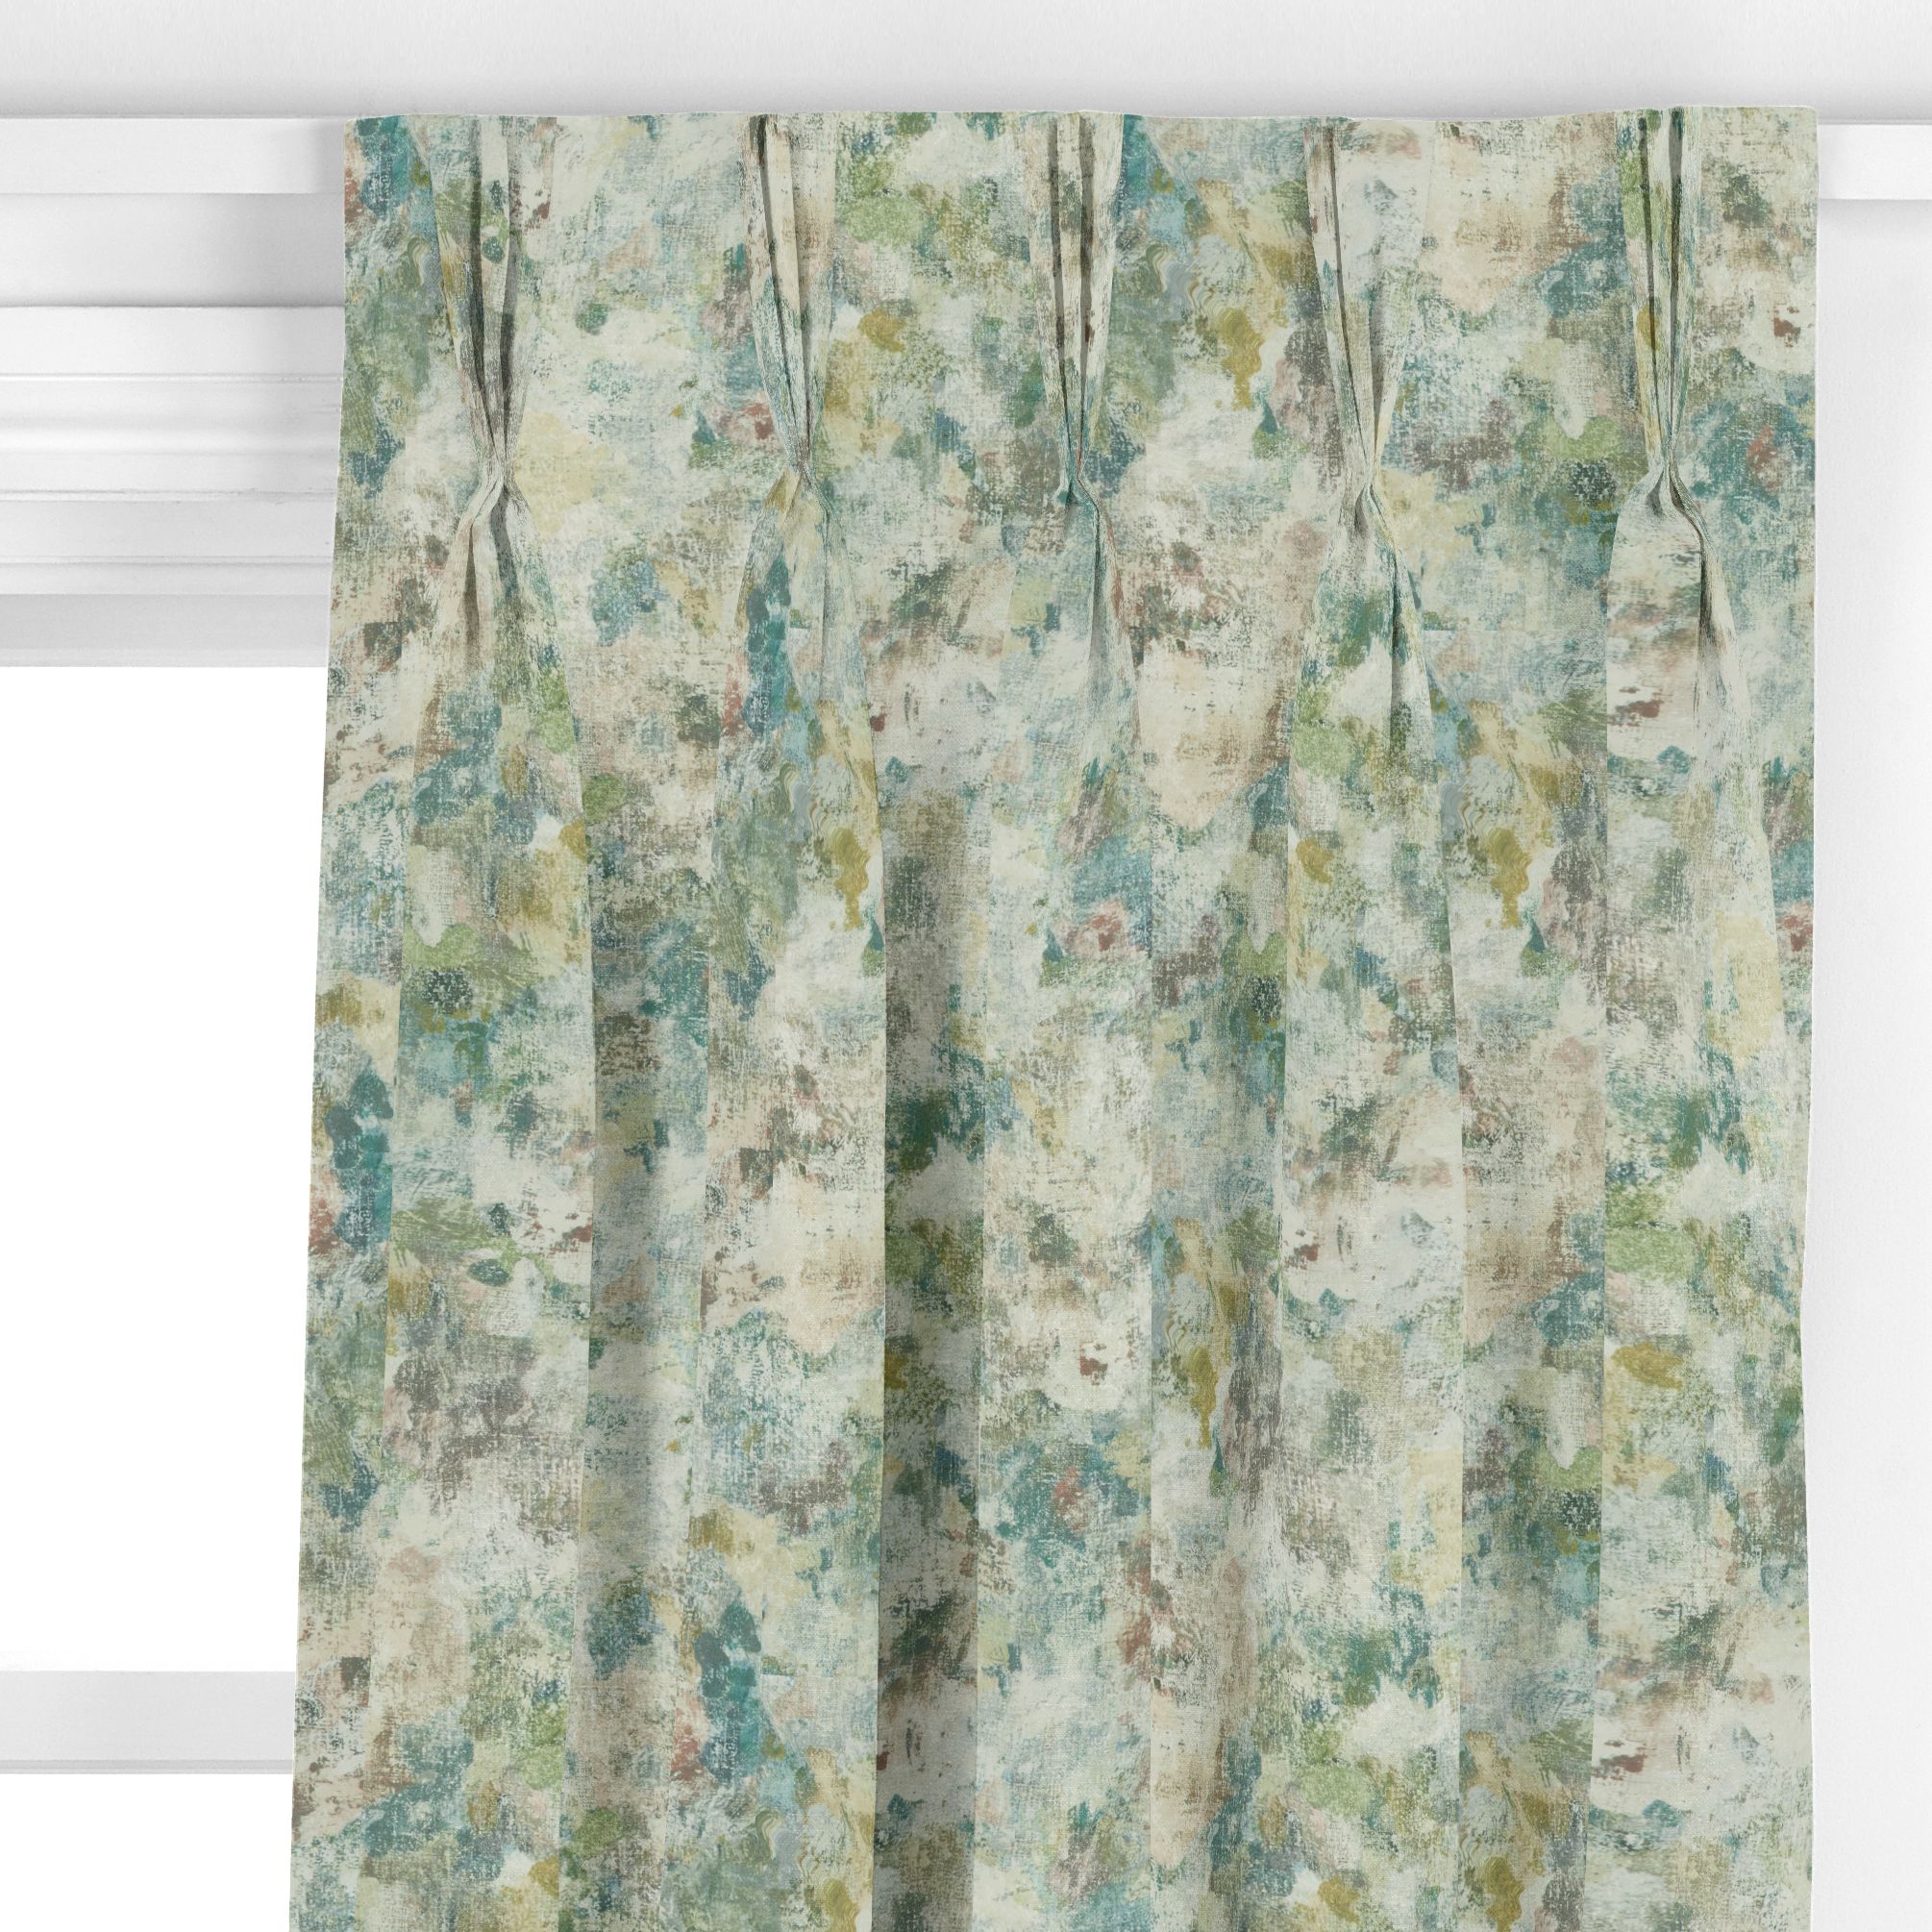 John Lewis Giverny Made to Measure Curtains, Multi